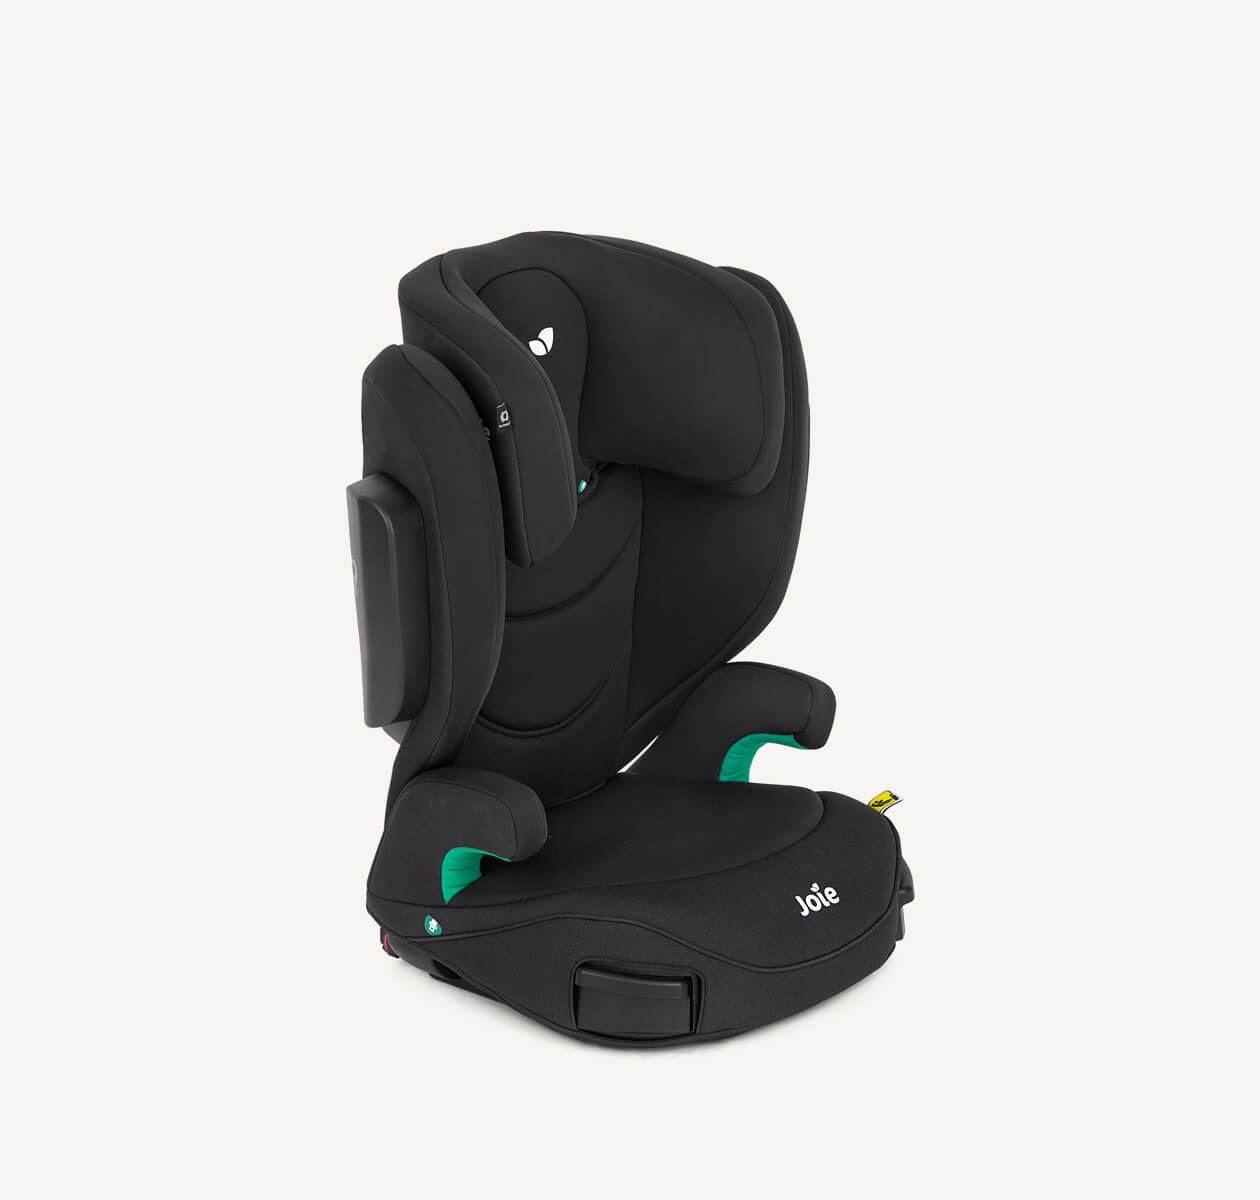  Black i-Trillo FX  high back booster seat facing to the right at a 45 degree angle with the headrest in the lowest position.